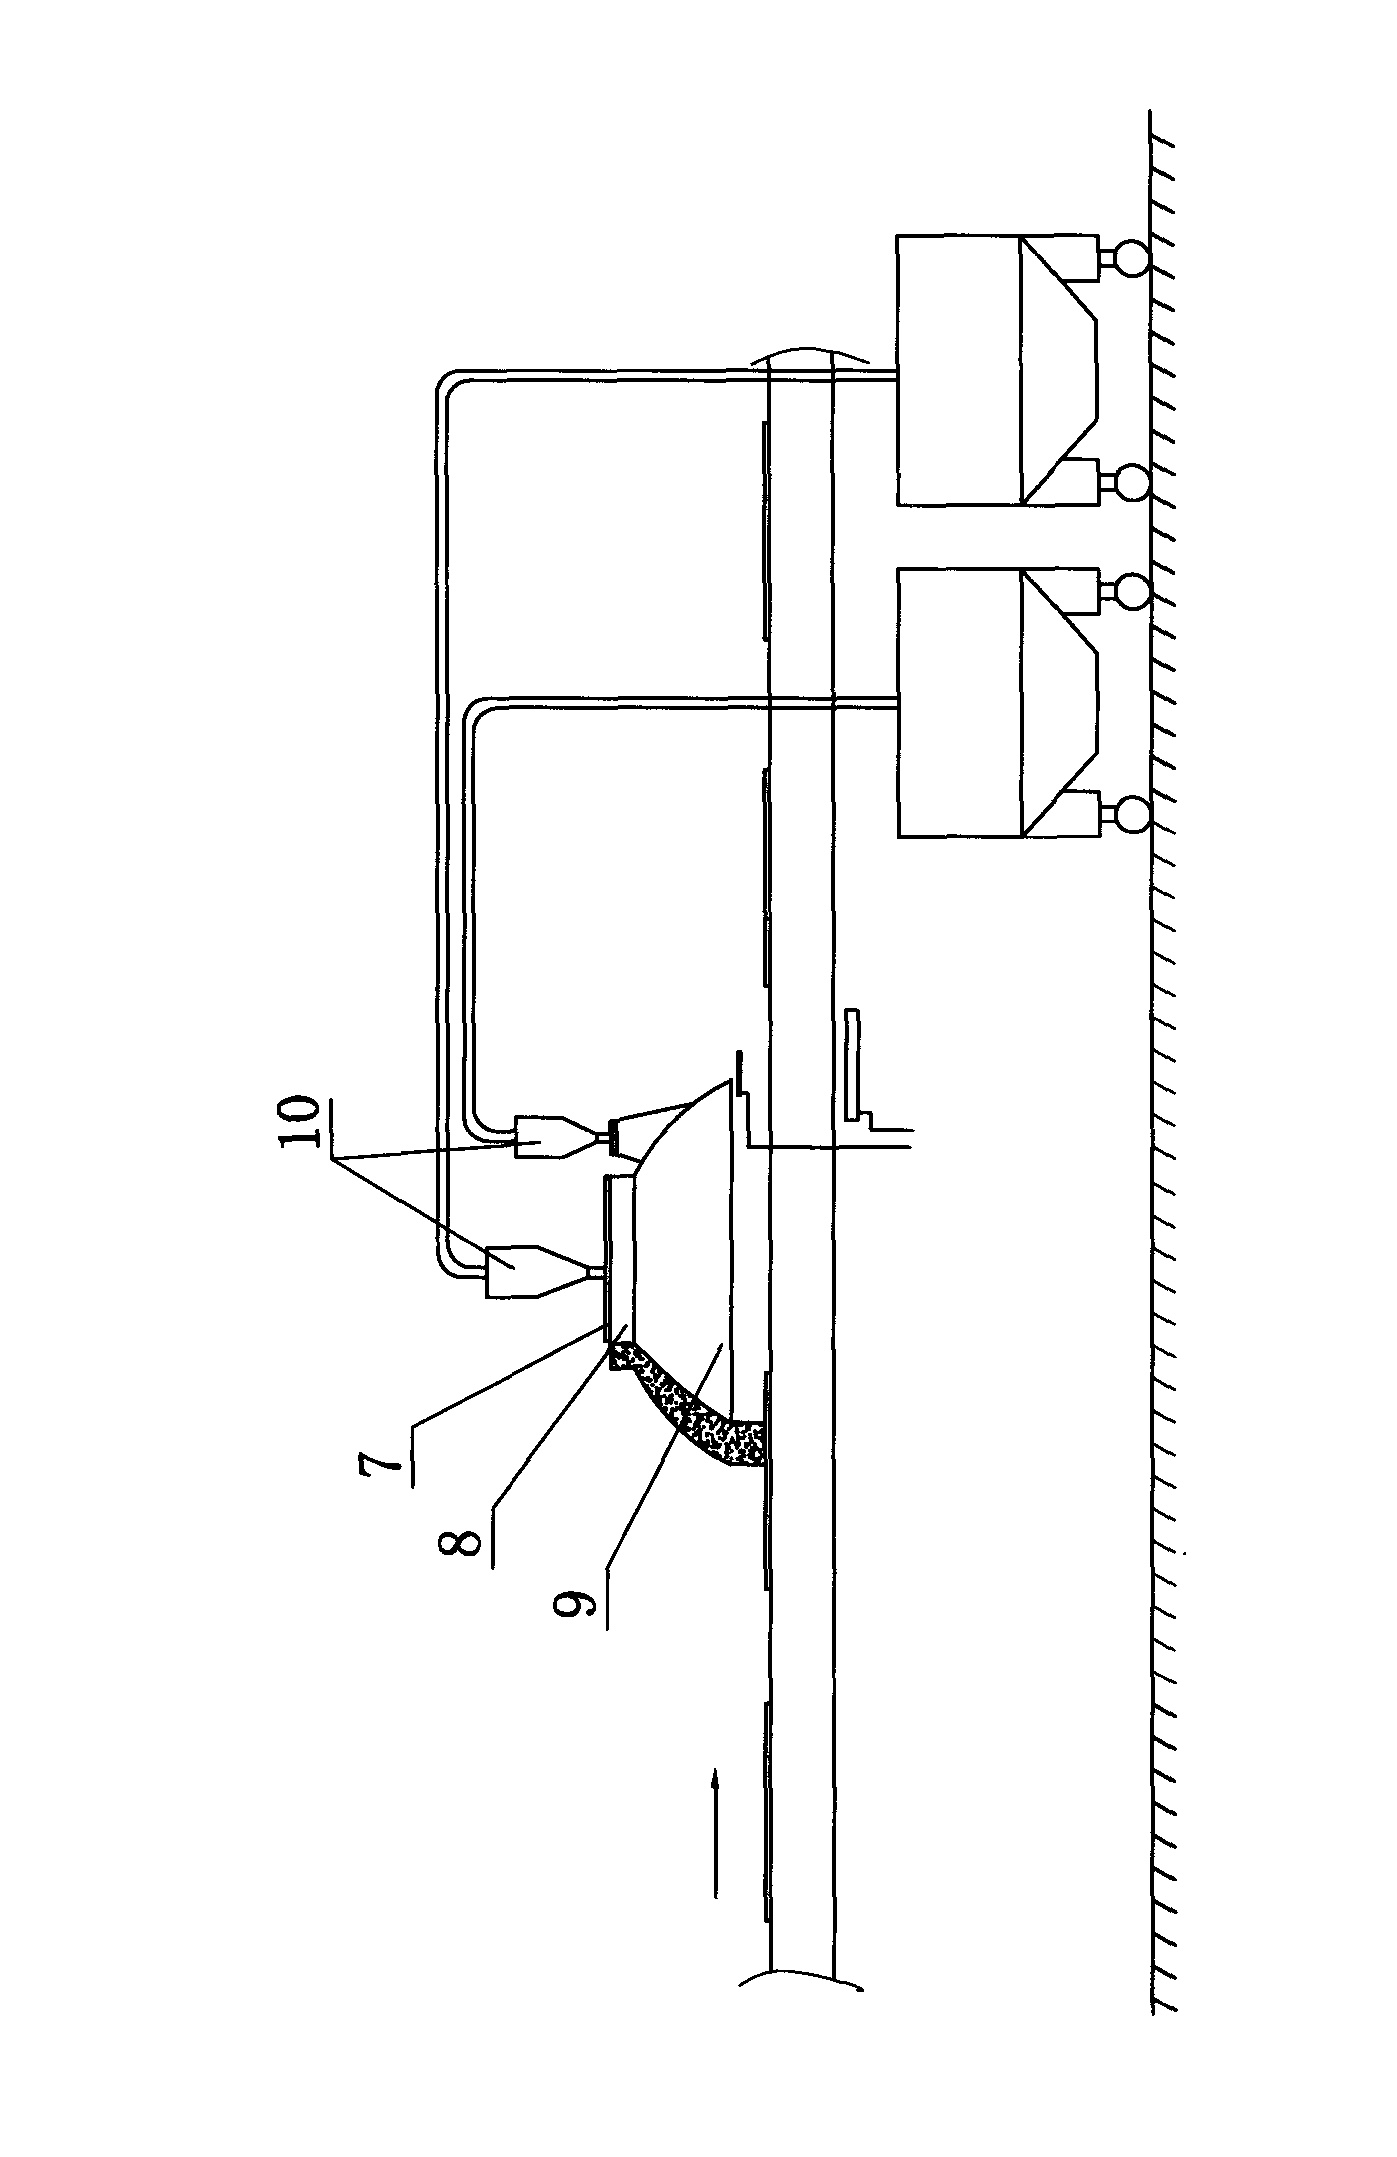 Bell jar type coating device capable of coating various glazes simultaneously